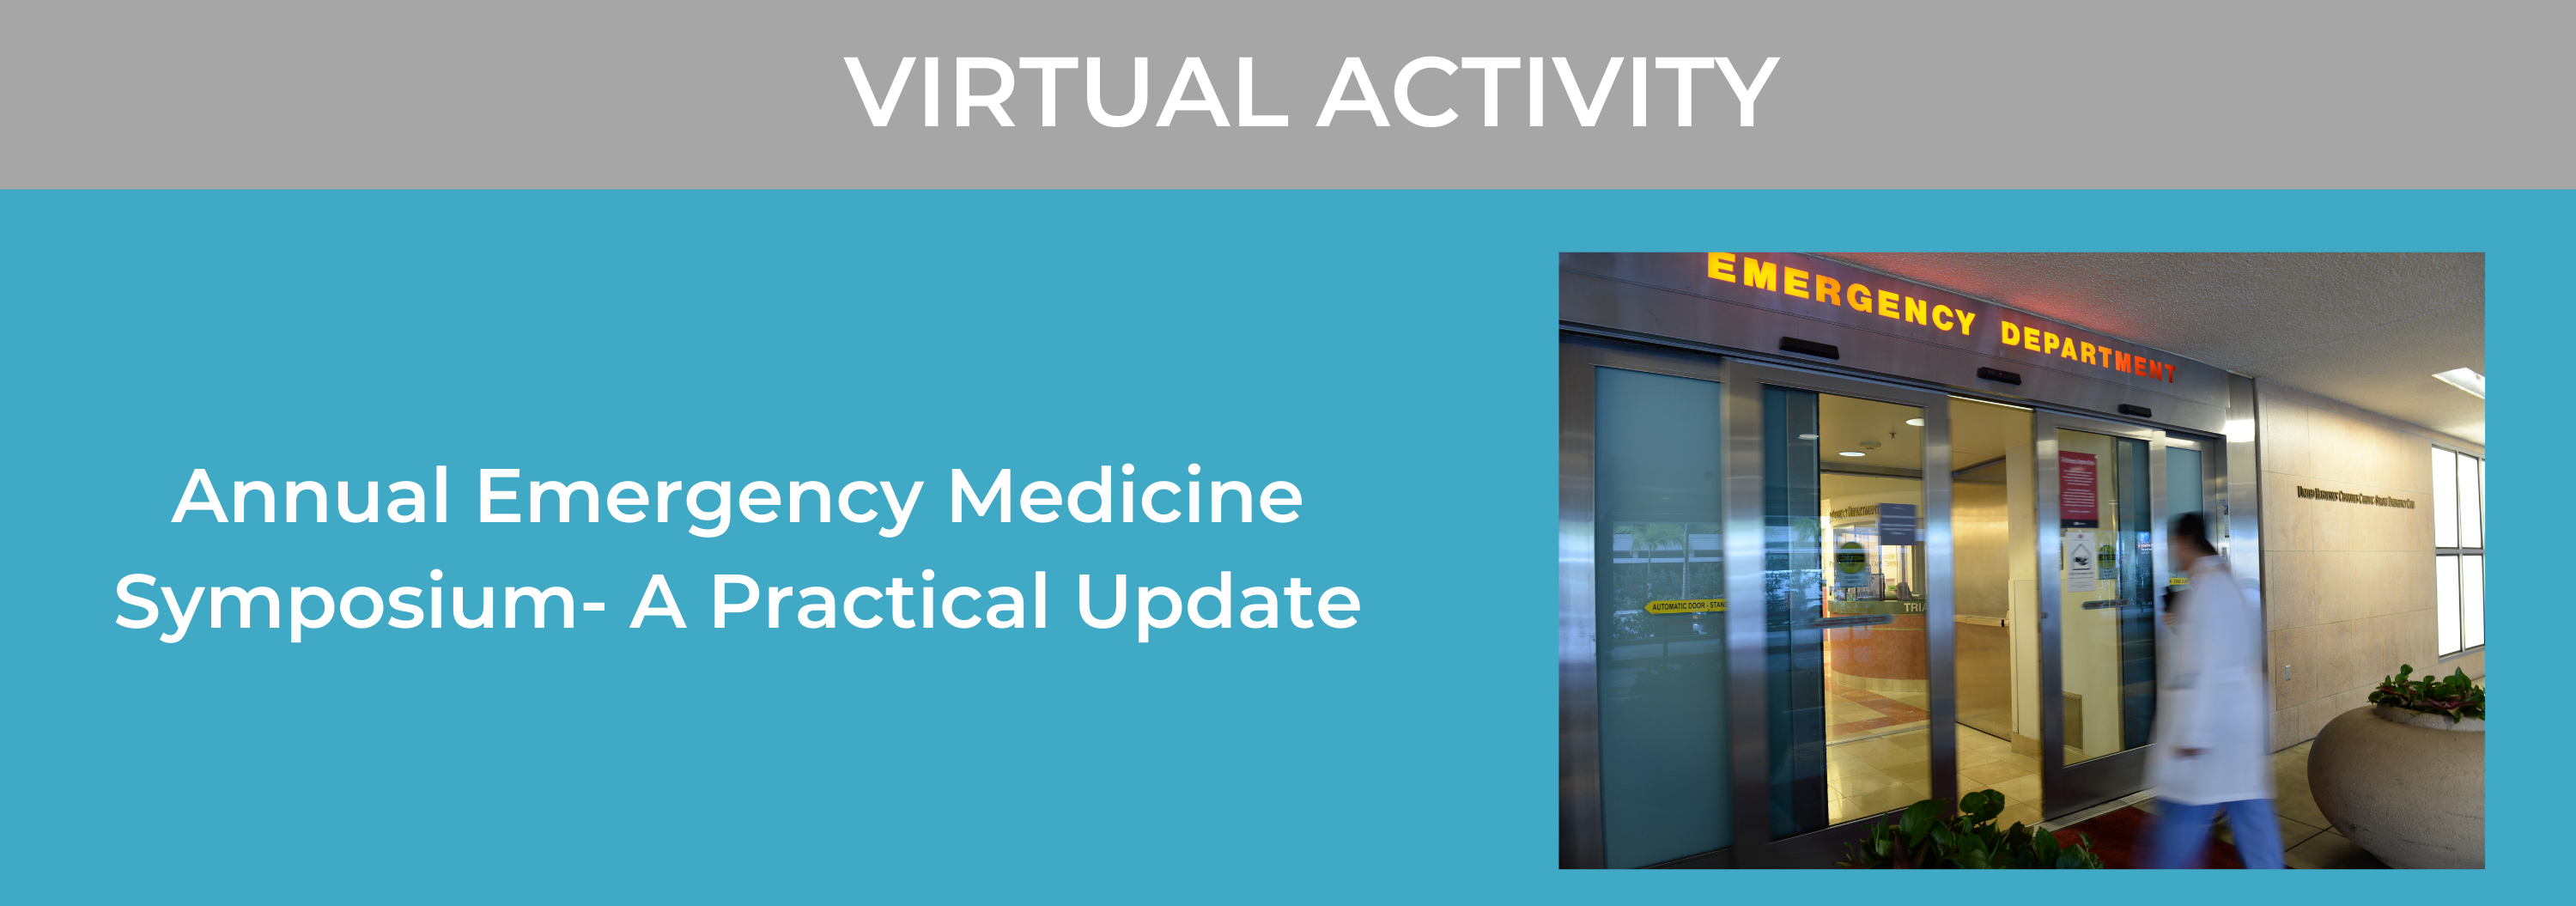 18th Annual Emergency Medicine Symposium - A Practical Update Banner